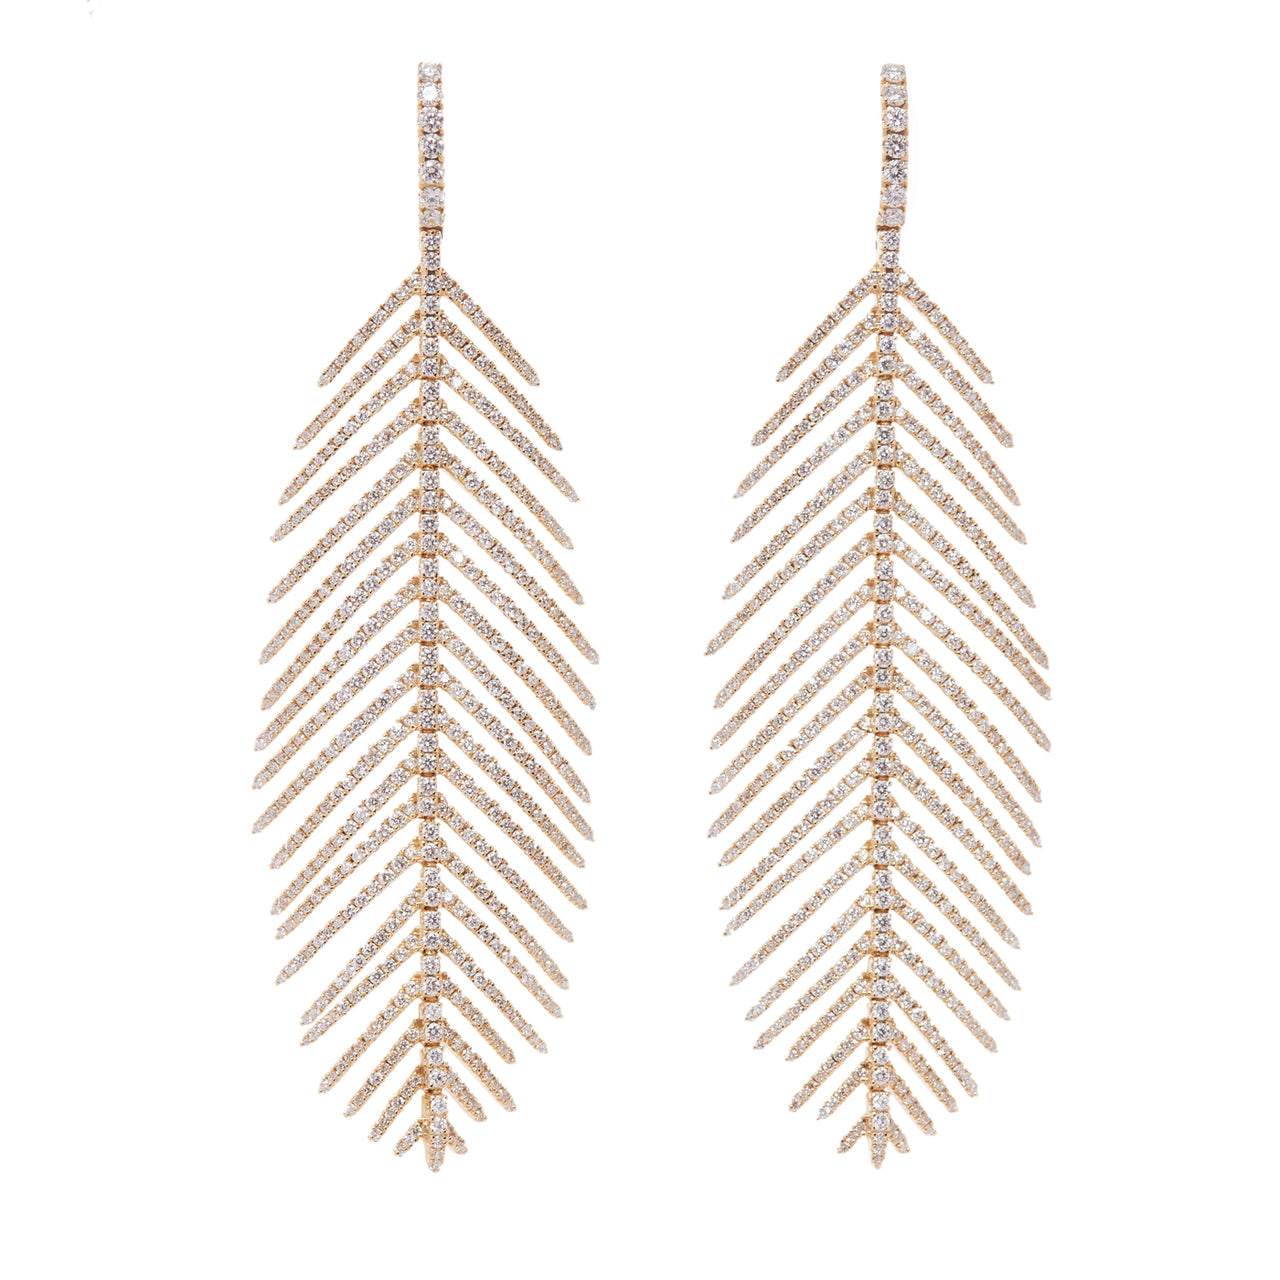 Feathers That Move Earrings